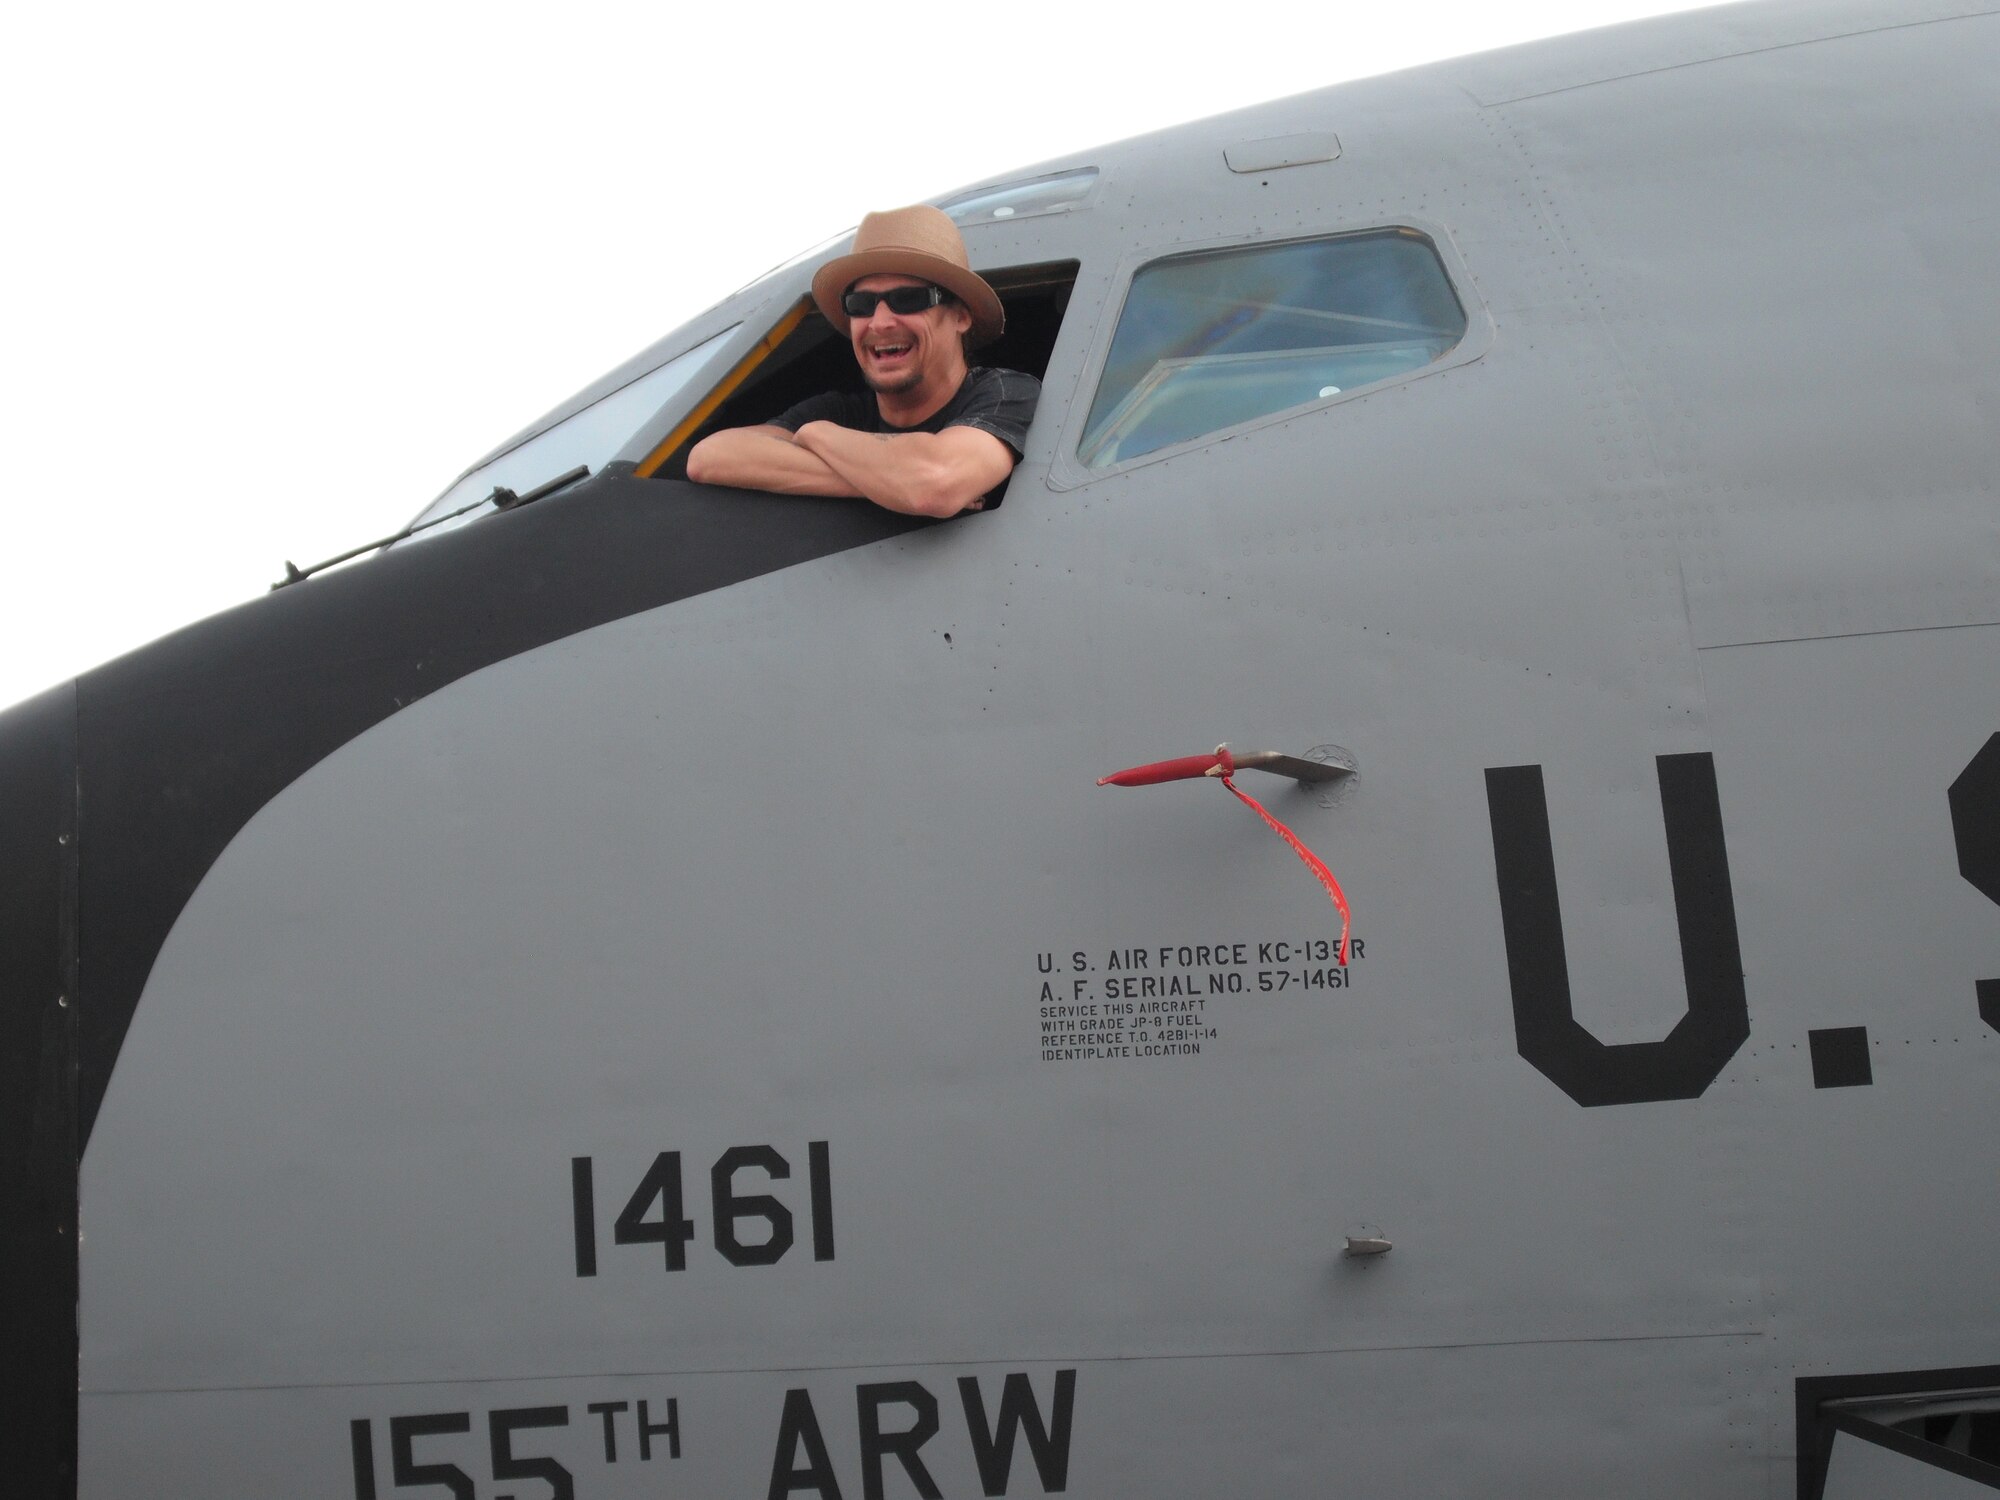 Kid Rock looks out from a Nebraska Air National Guard KC-135R Stratotanker on December 6, 2009 while doing a USO show for deployed troops at Al Udeid AB, Qatar. The Stratotanker was one of two 155th Air Refueling Wing aircraft deployed to Al Udeid, AB. (Nebraska Air National Guard photo by Capt. Lloyd Blessington)